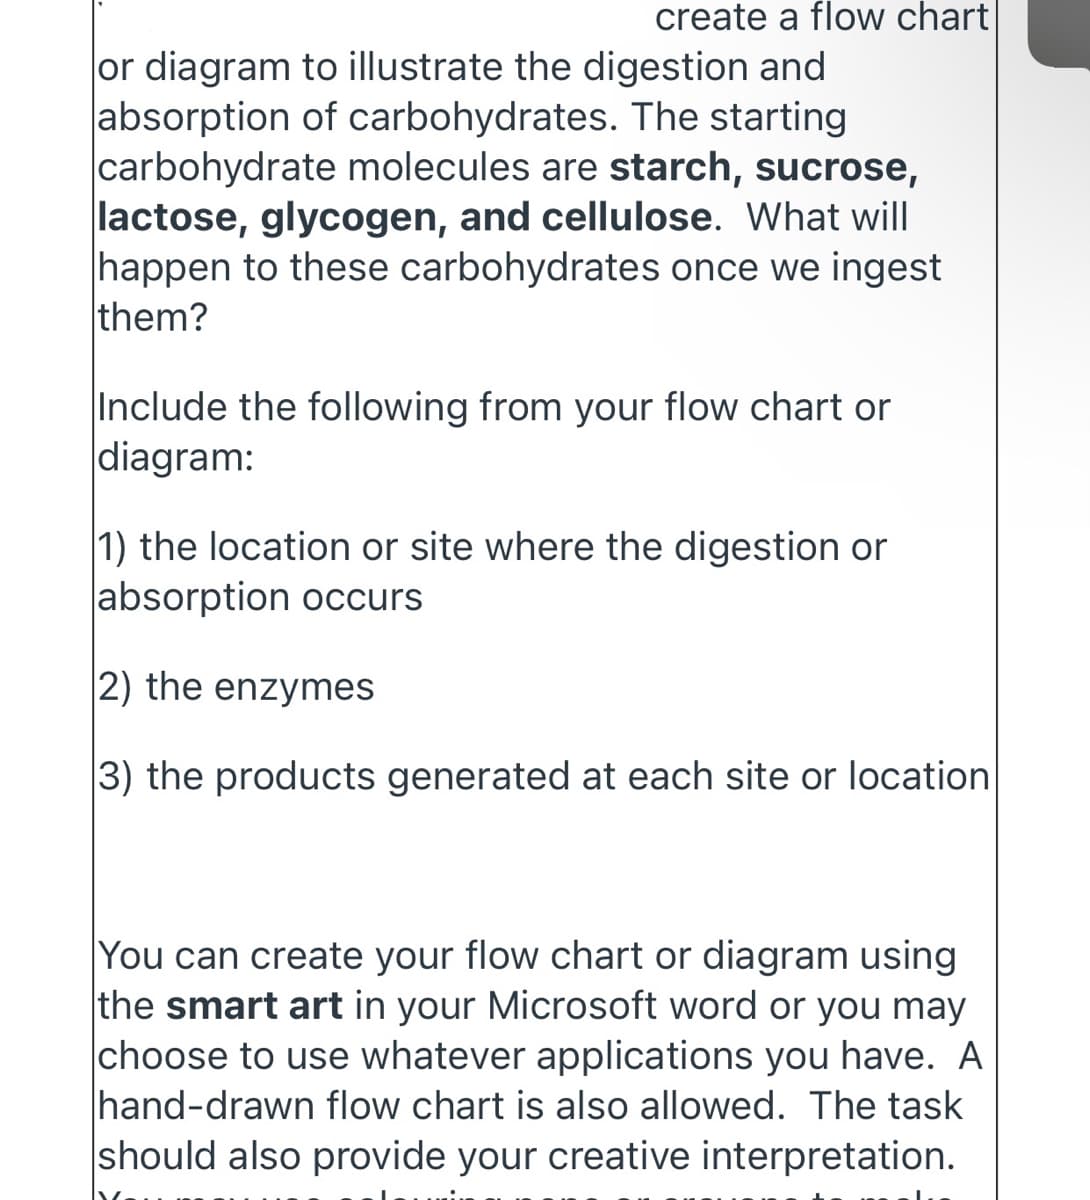 create a flow chart
or diagram to illustrate the digestion and
absorption of carbohydrates. The starting
carbohydrate molecules are starch, sucrose,
lactose, glycogen, and cellulose. What will
happen to these carbohydrates once we ingest
them?
Include the following from your flow chart or
|diagram:
1) the location or site where the digestion or
|absorption occurs
2) the enzymes
3) the products generated at each site or location
You can create your flow chart or diagram using
the smart art in your Microsoft word or you may
choose to use whatever applications you have. A
hand-drawn flow chart is also allowed. The task
should also provide your creative interpretation.
